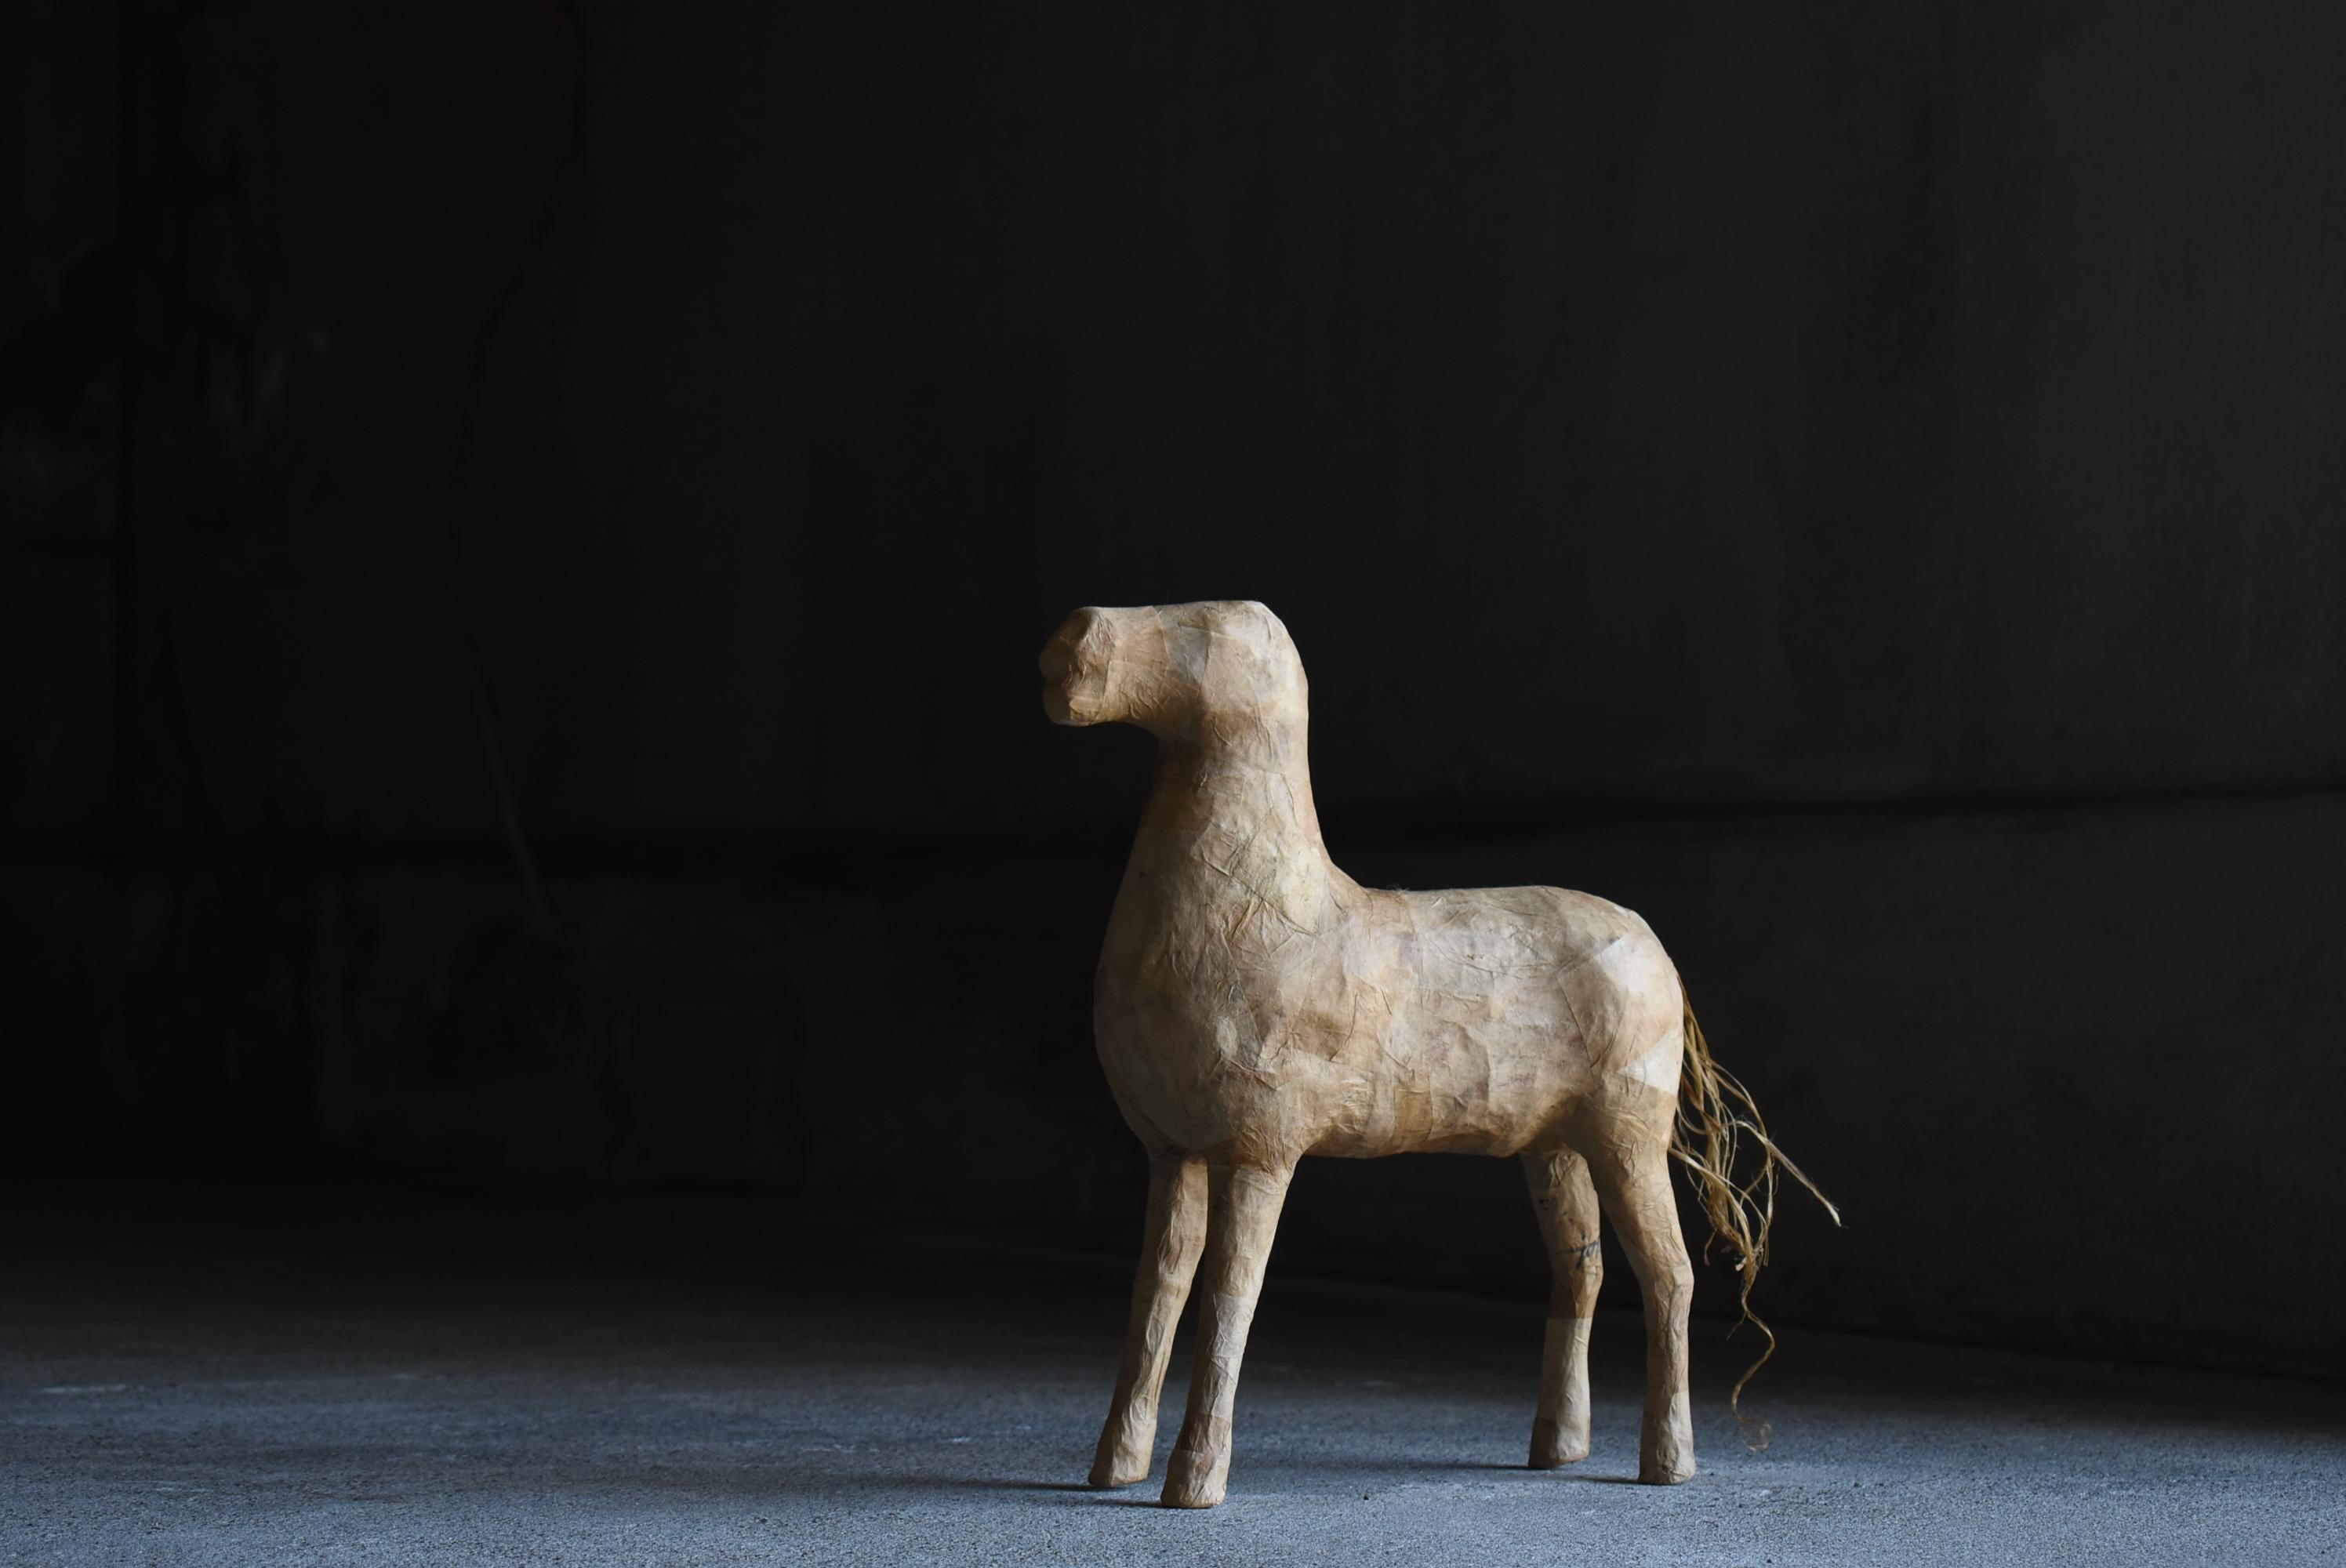 This is an old Japanese papier-mache horse.
It is from the Meiji period (1860s-1920s).
It is a rare item that is not seen very often.

It is very elaborate.
It can be said to be the workmanship of Japanese craftsmen.

Since it is made of